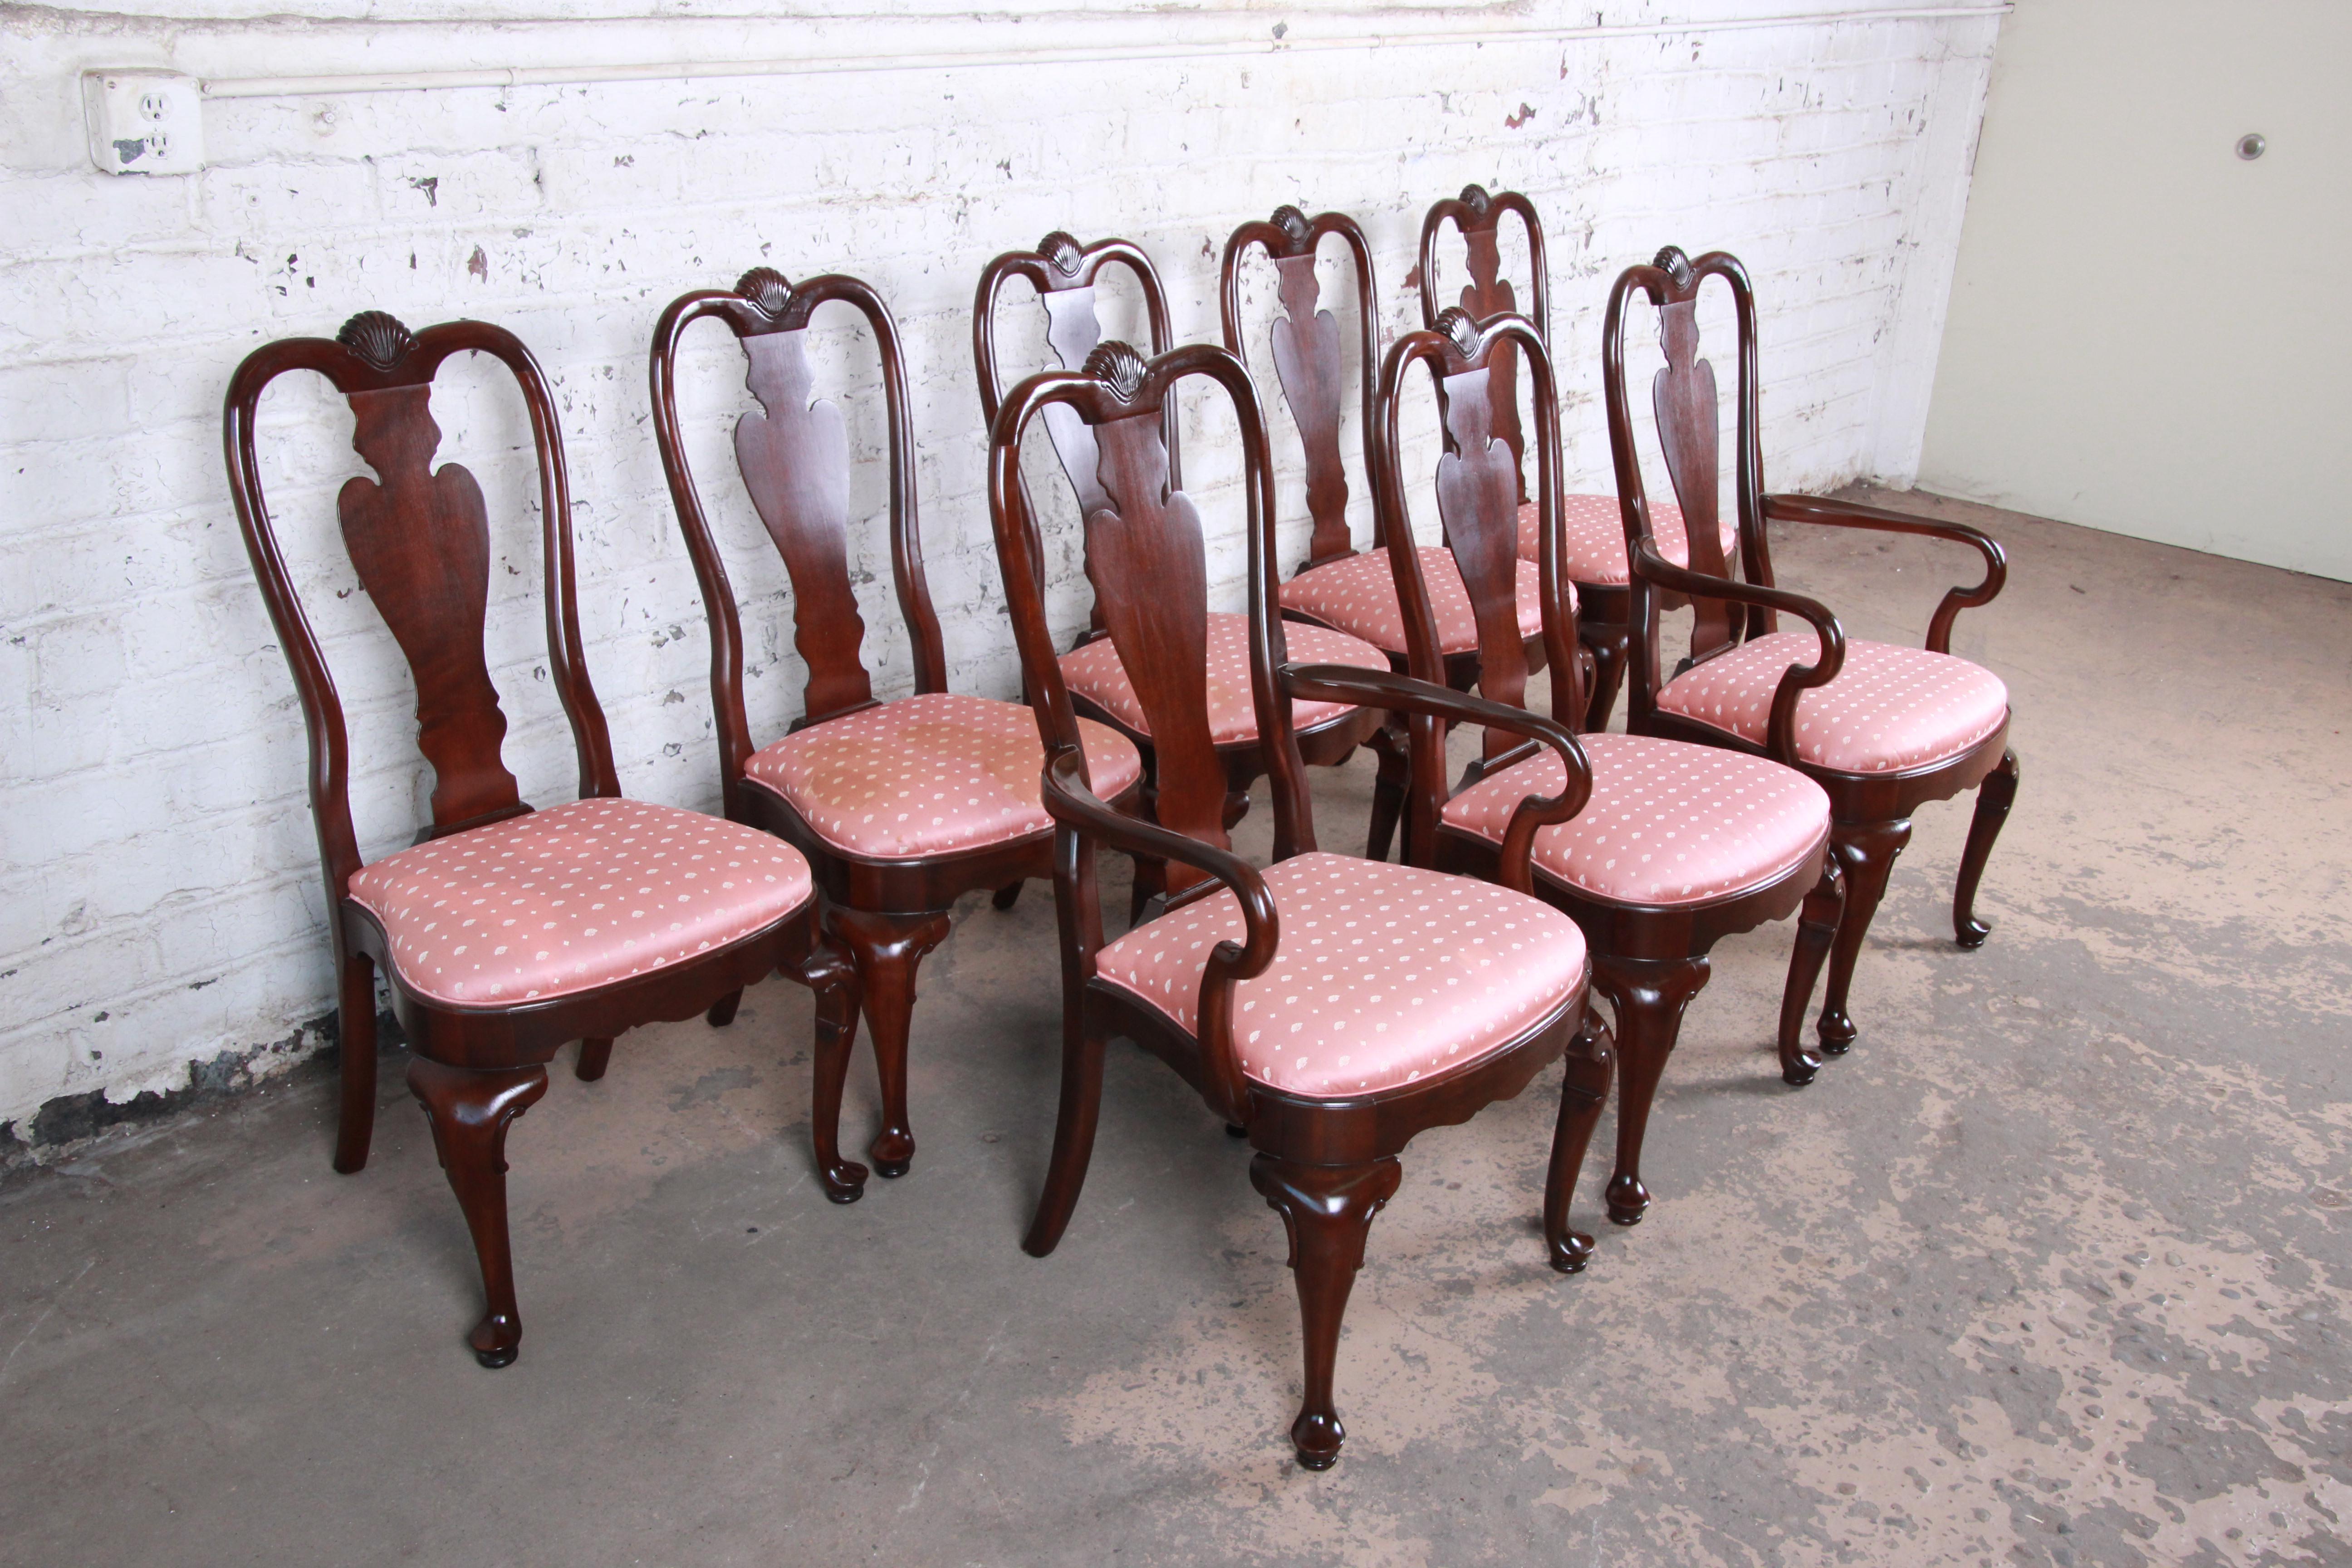 A gorgeous set of eight Queen Anne style dining chairs by Ethan Allen. The set includes two captain armchairs and six side chairs. The chairs feature solid cherrywood construction and nice carved wood details with a shell motif. The original pink